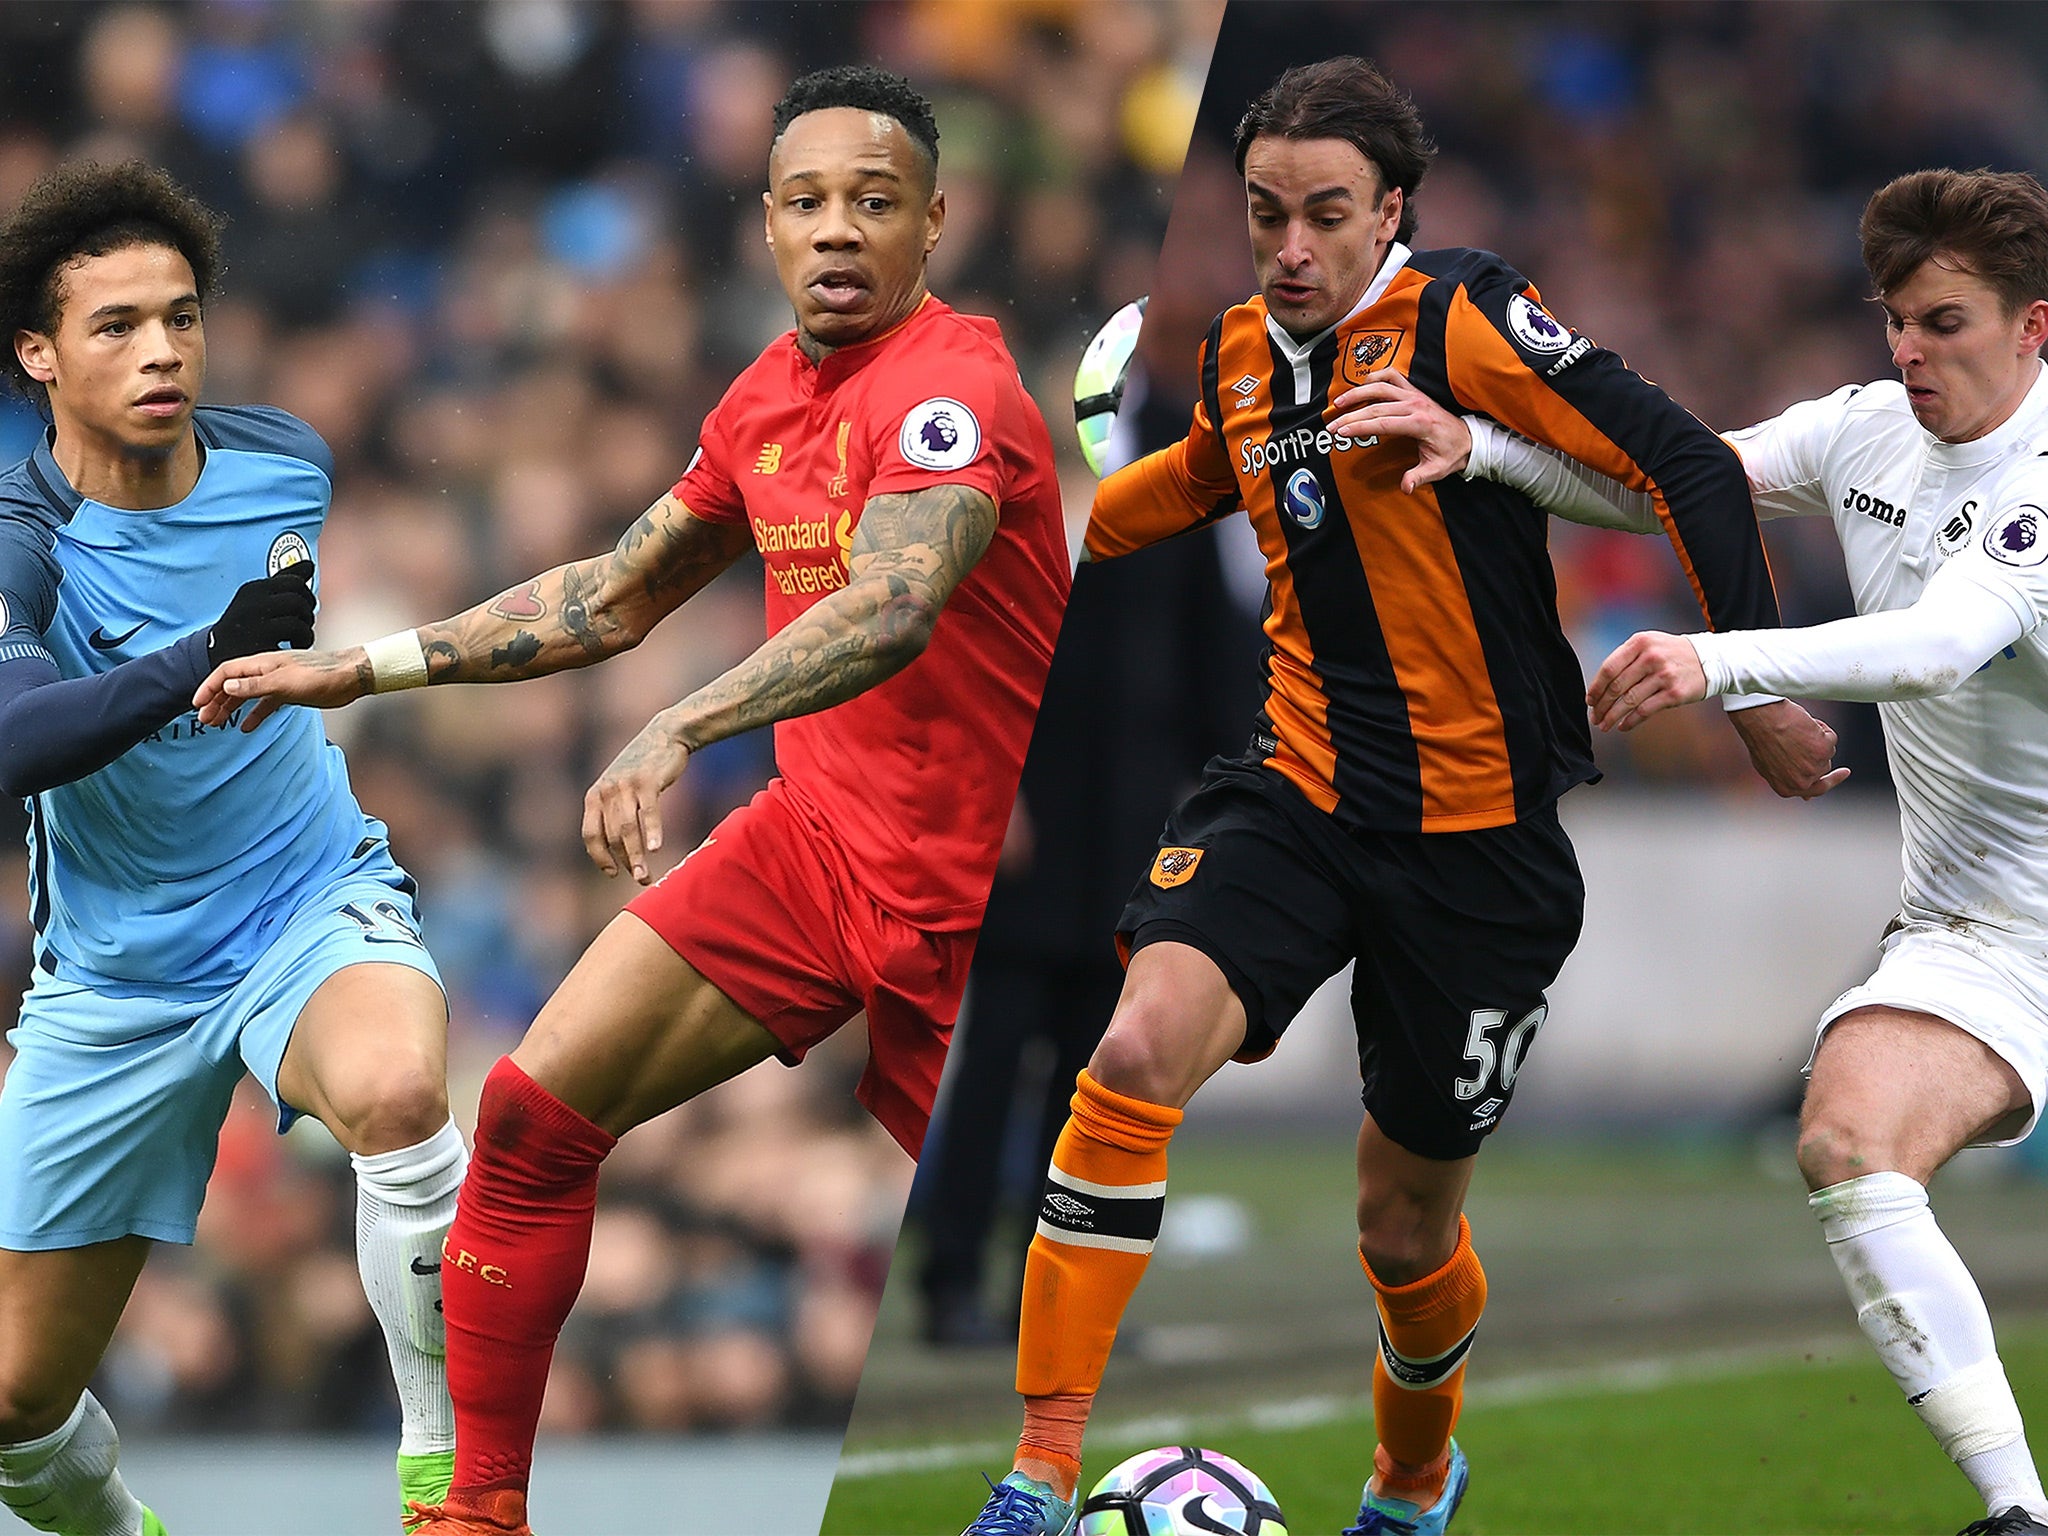 Liverpool, Manchester City, Hull and Swansea could all compete in end-of-season playoffs